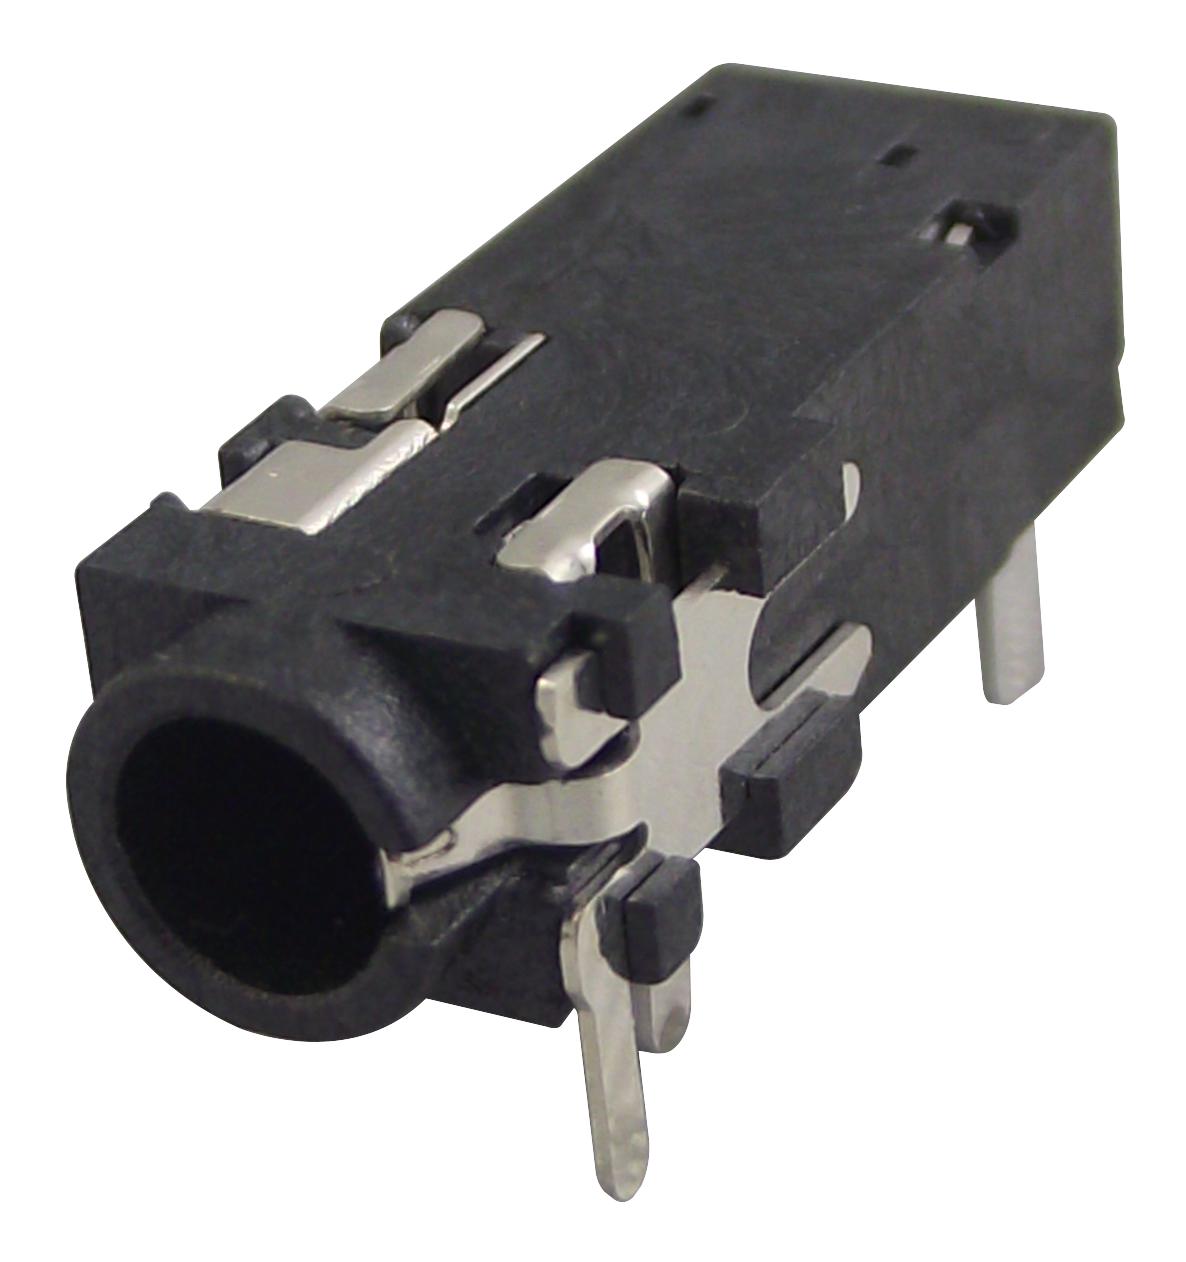 FC68127 CONNECTOR, PHONO, 3.5MM, JACK, 4POLE CLIFF ELECTRONIC COMPONENTS